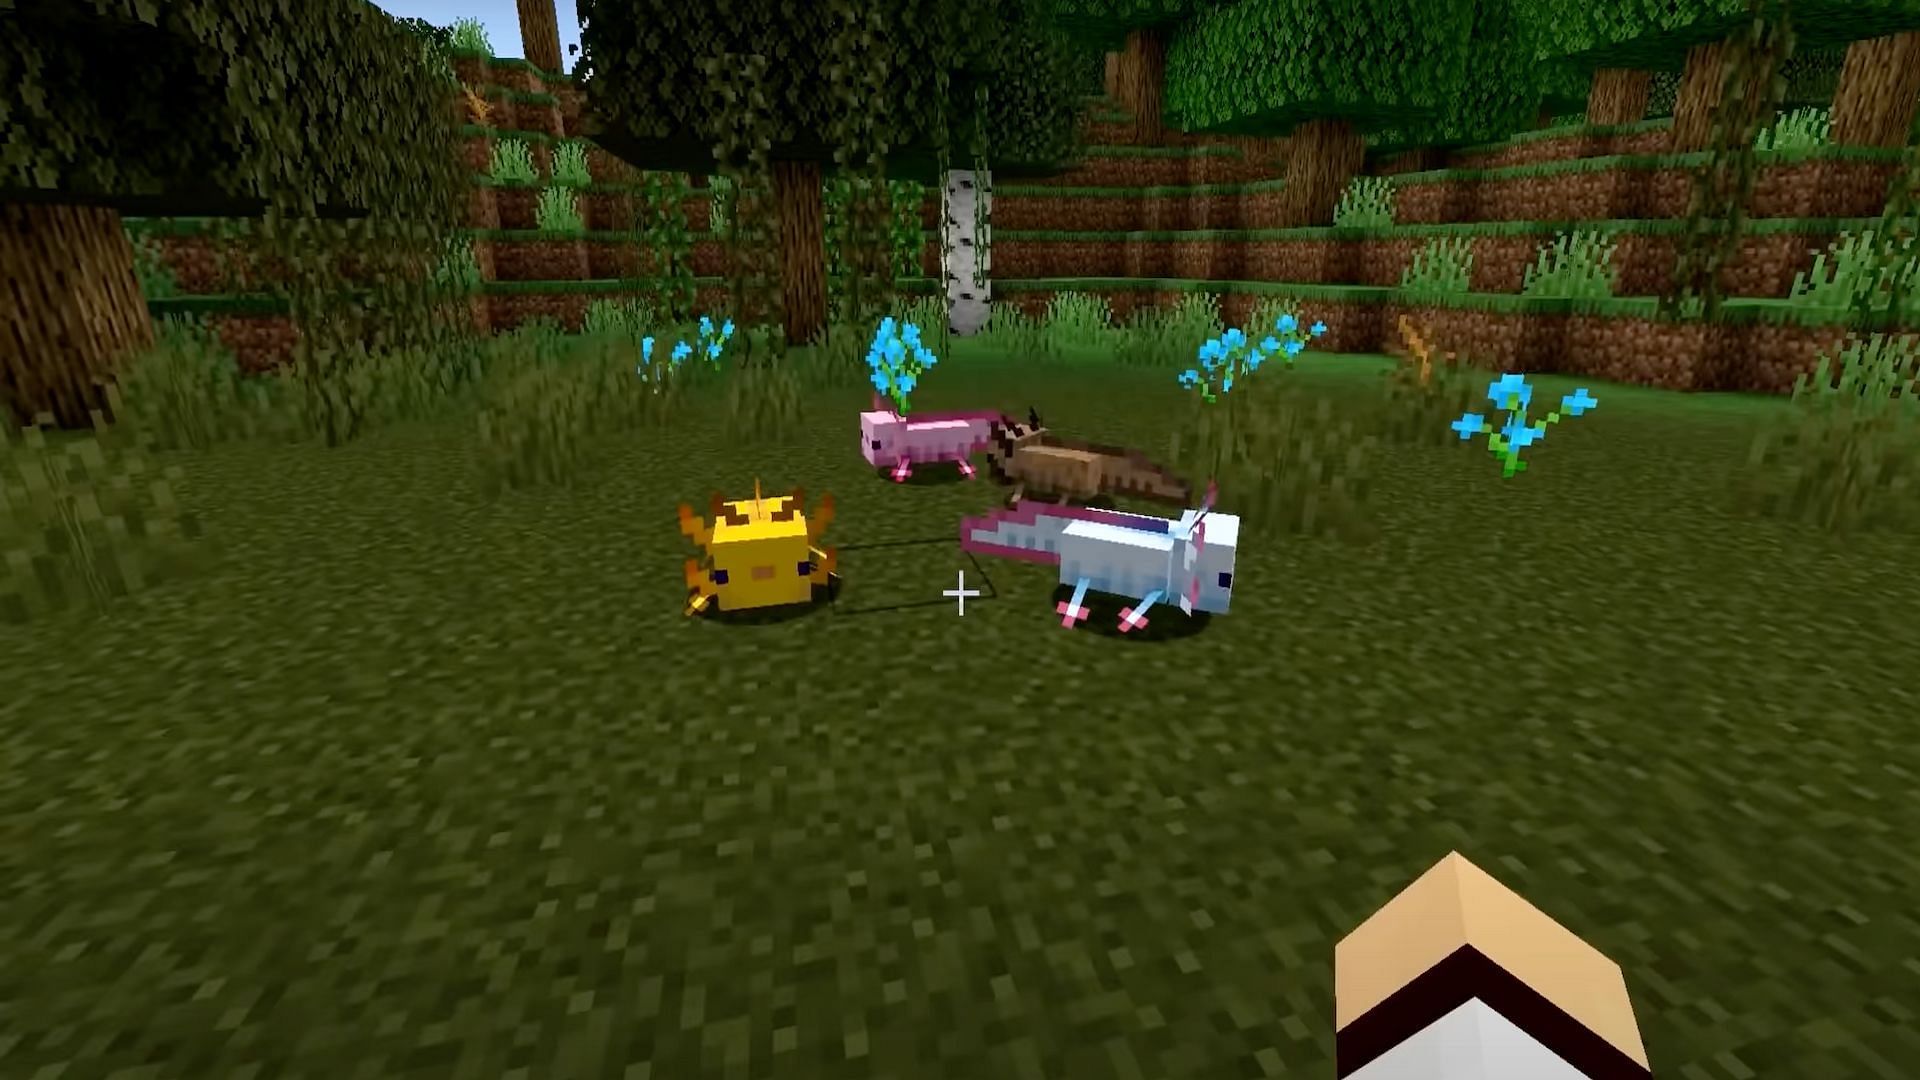 Axolotls are a cute but elusive mob in Minecraft that can attack other mobs and follow the player around (Image via iDeactivateMC/YouTube)